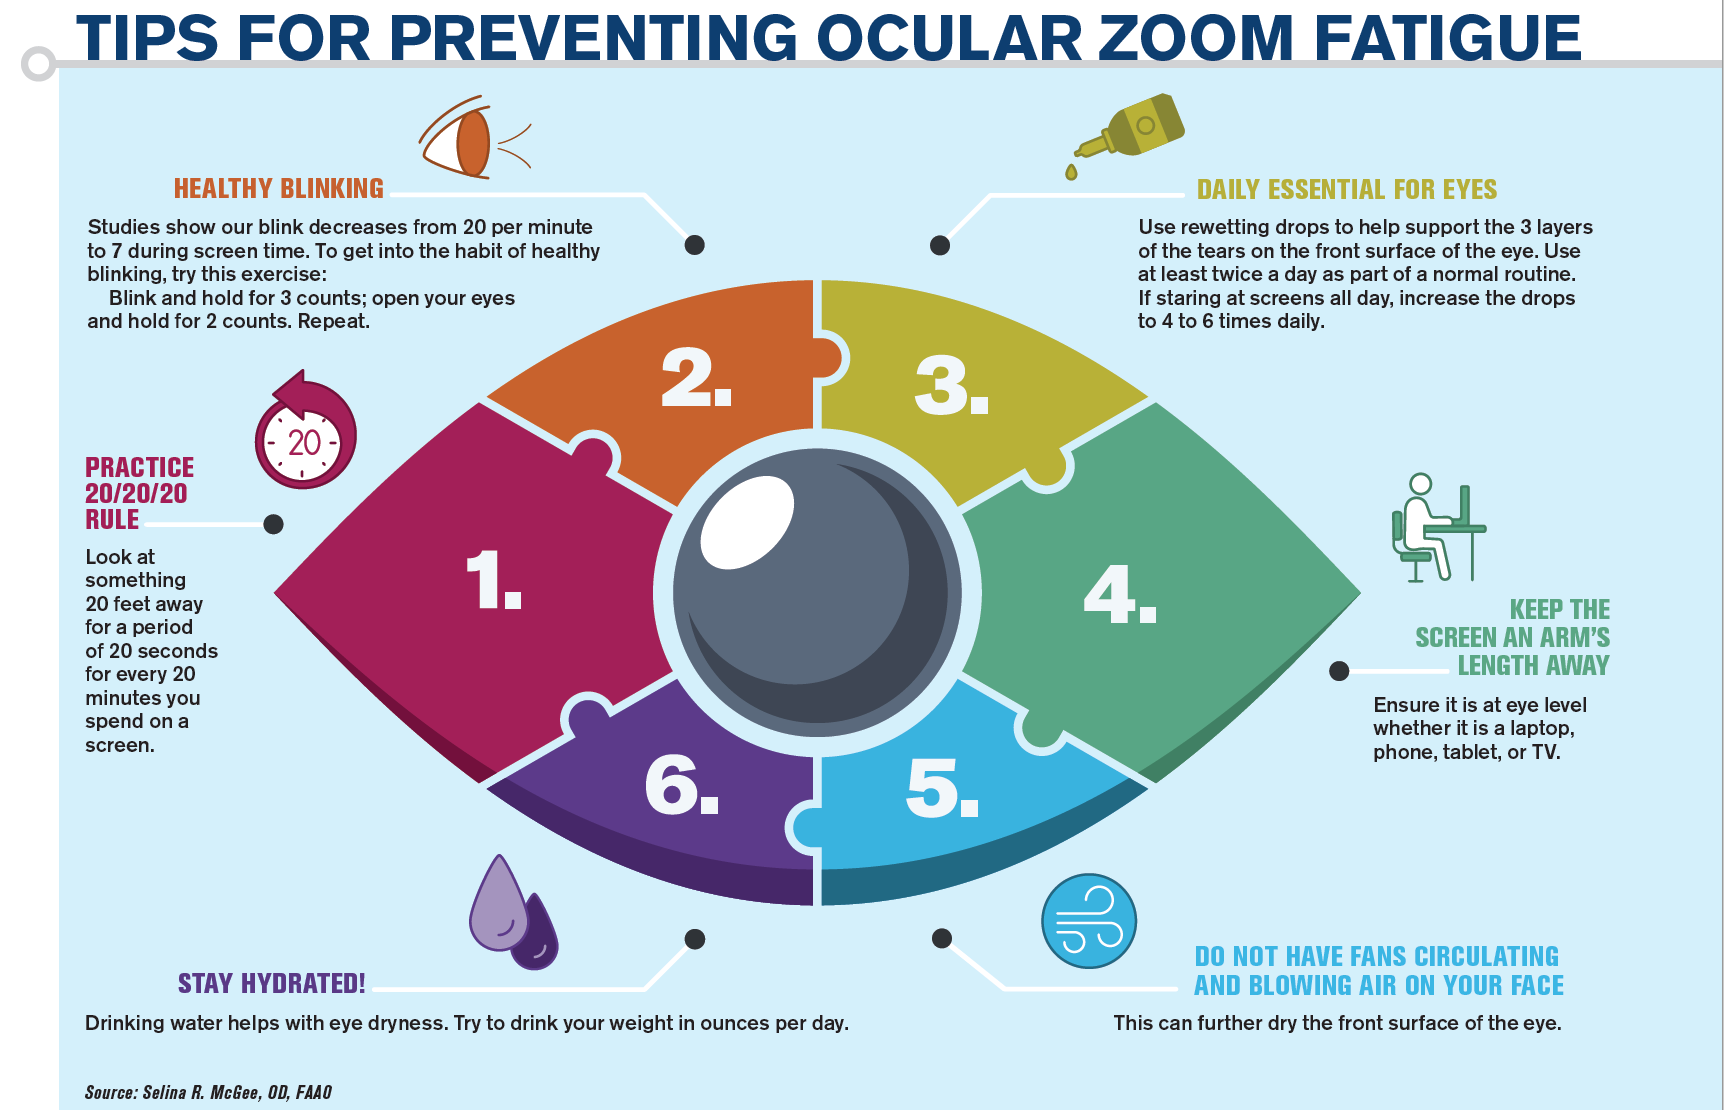 Tips for preventing ocular zoom fatigue